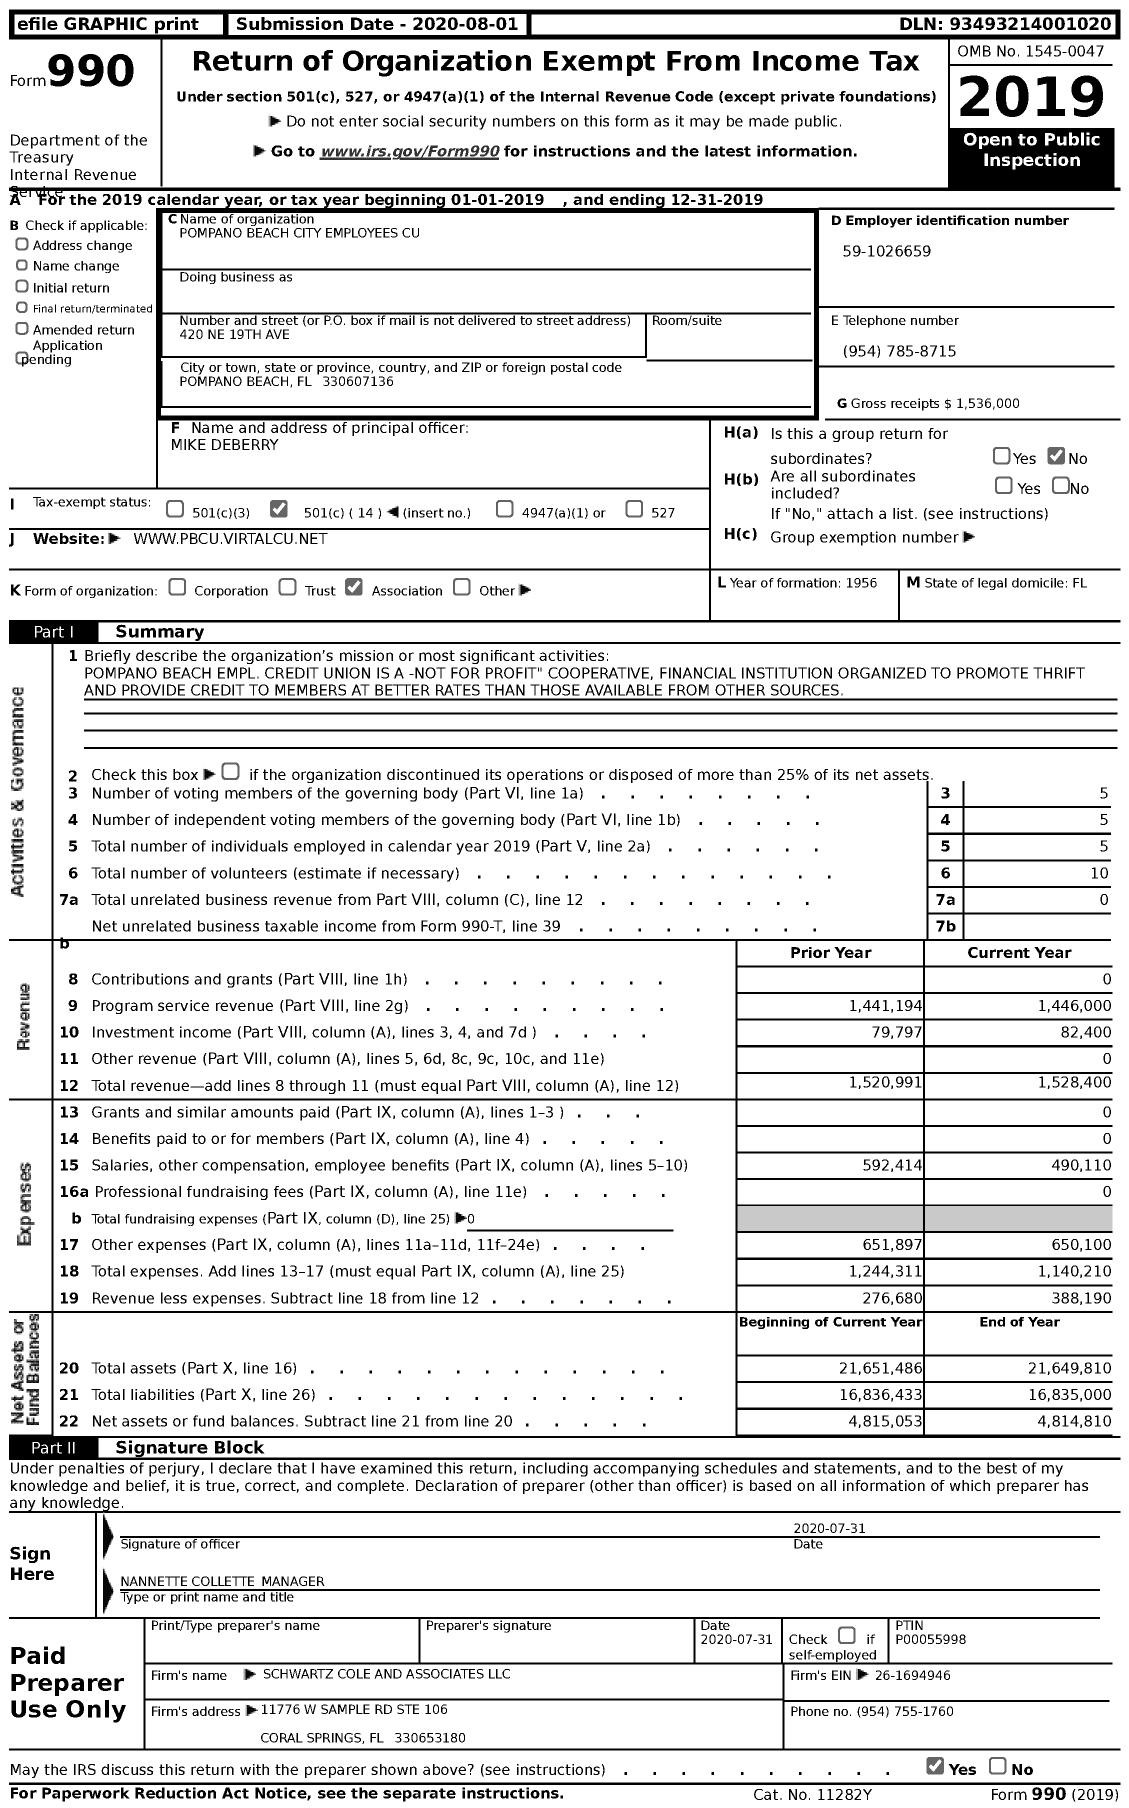 Image of first page of 2019 Form 990 for State Chartered Credit Unions in Florida - 350 Pompano Beach City Employees Cu